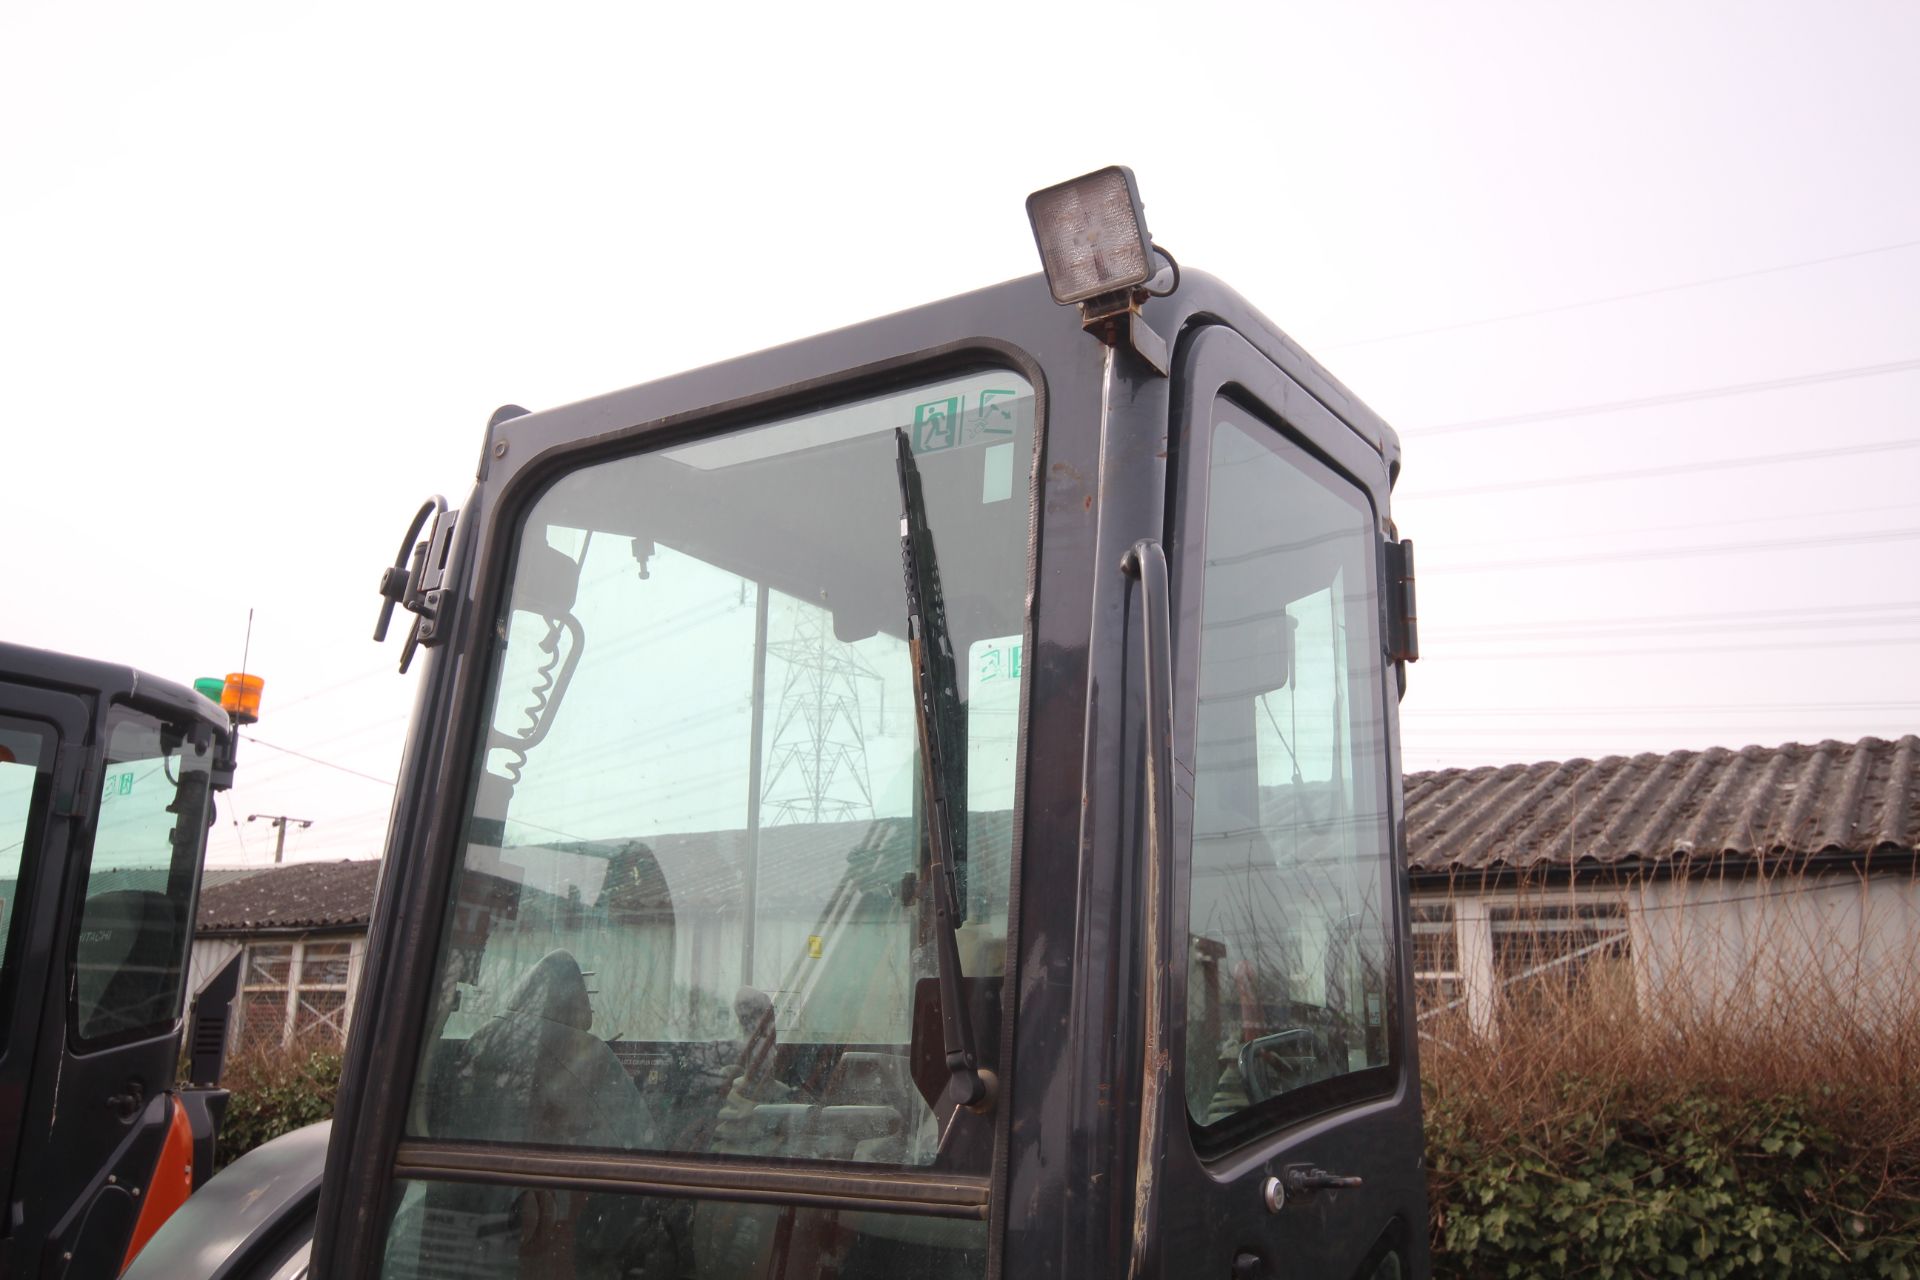 Hitachi ZX55U-5A CLR 5.5T rubber track excavator. 2018. 3,217 hours. Serial number HCMA - Image 29 of 85